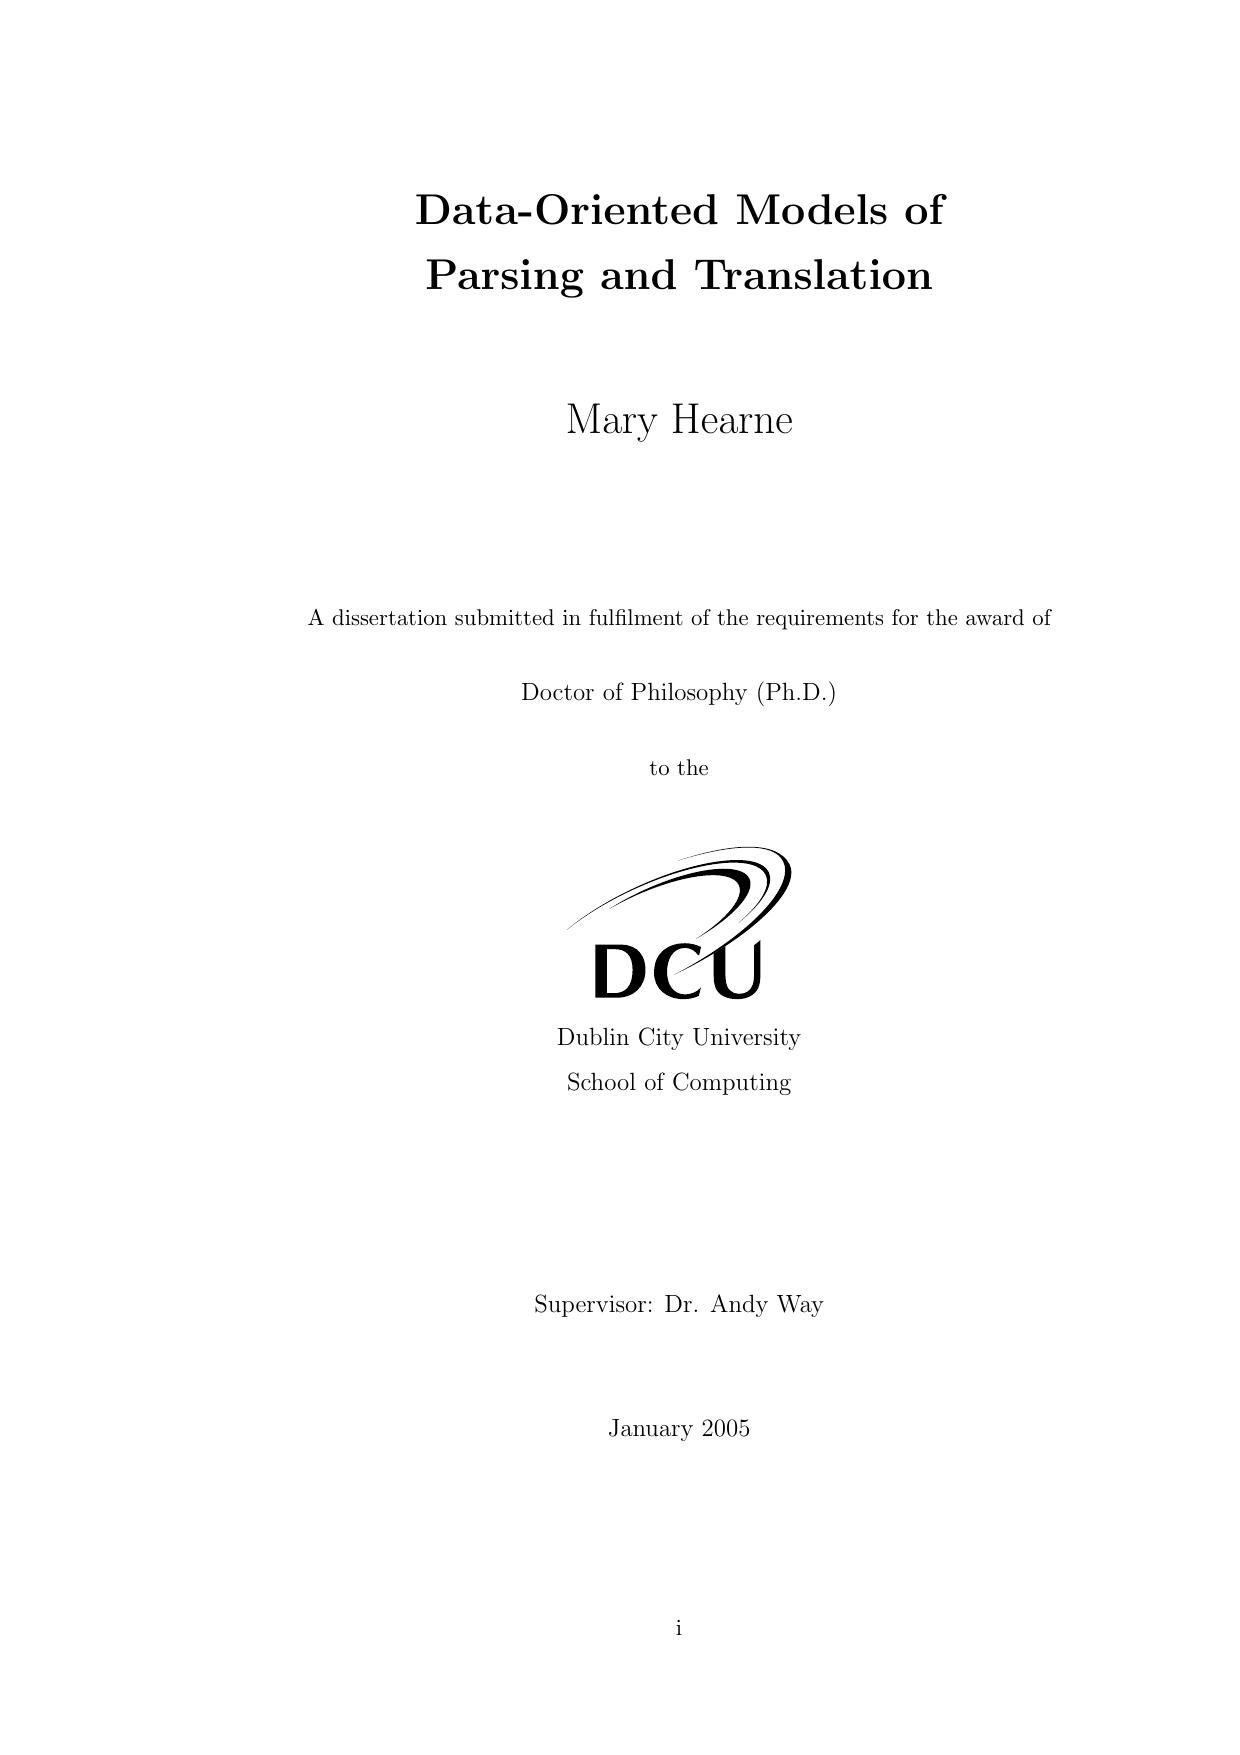 Data-Oriented Models of Parsing and Translation - Thesis